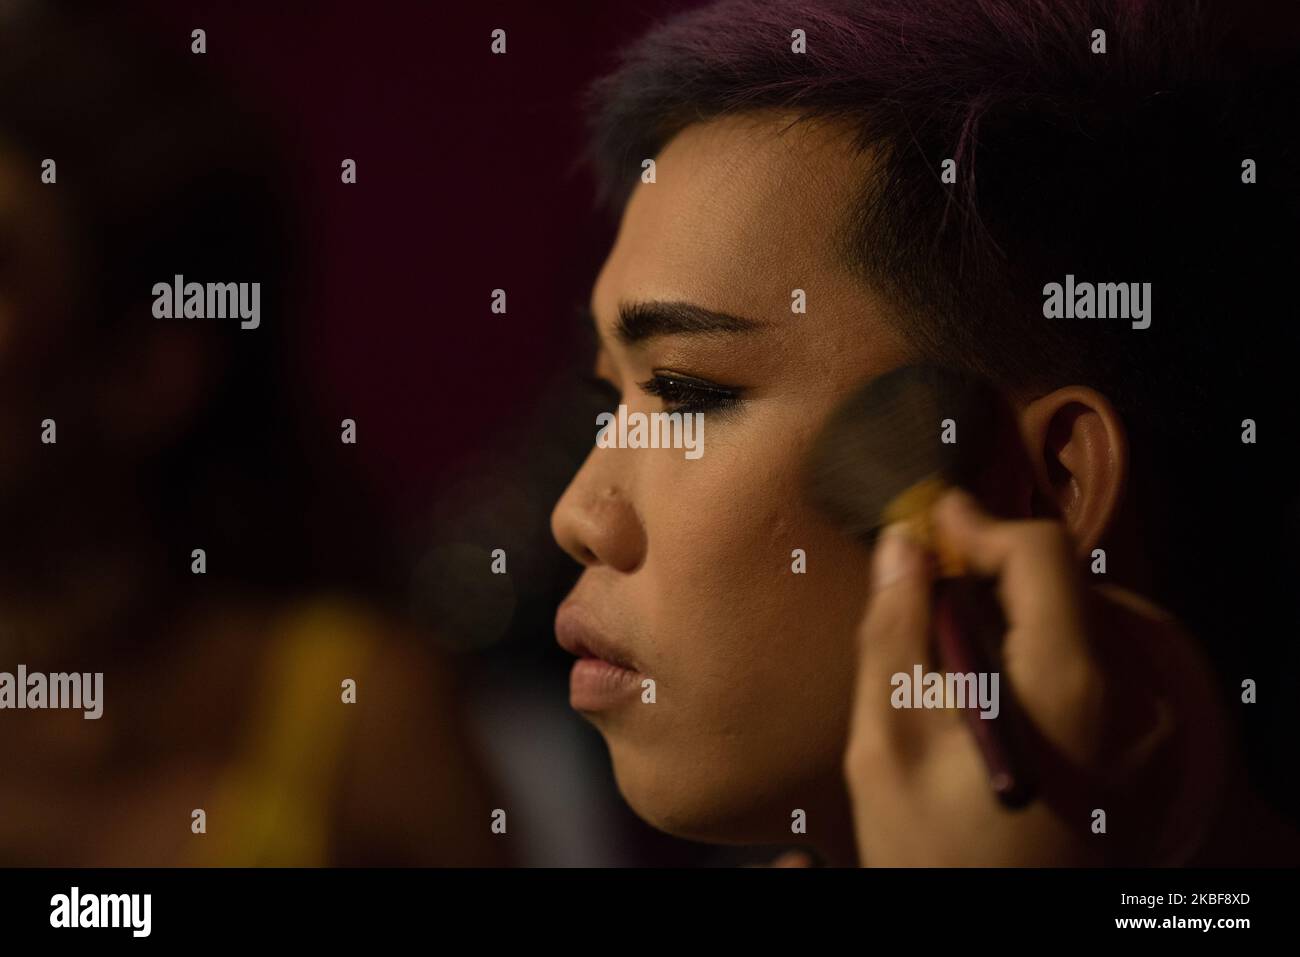 A drag queen prepares backstage during the ”&Proud' LGBT festival in Yangon, Myanmar on 24 January, 2020. (Photo by Shwe Paw Mya Tin/NurPhoto) Stock Photo